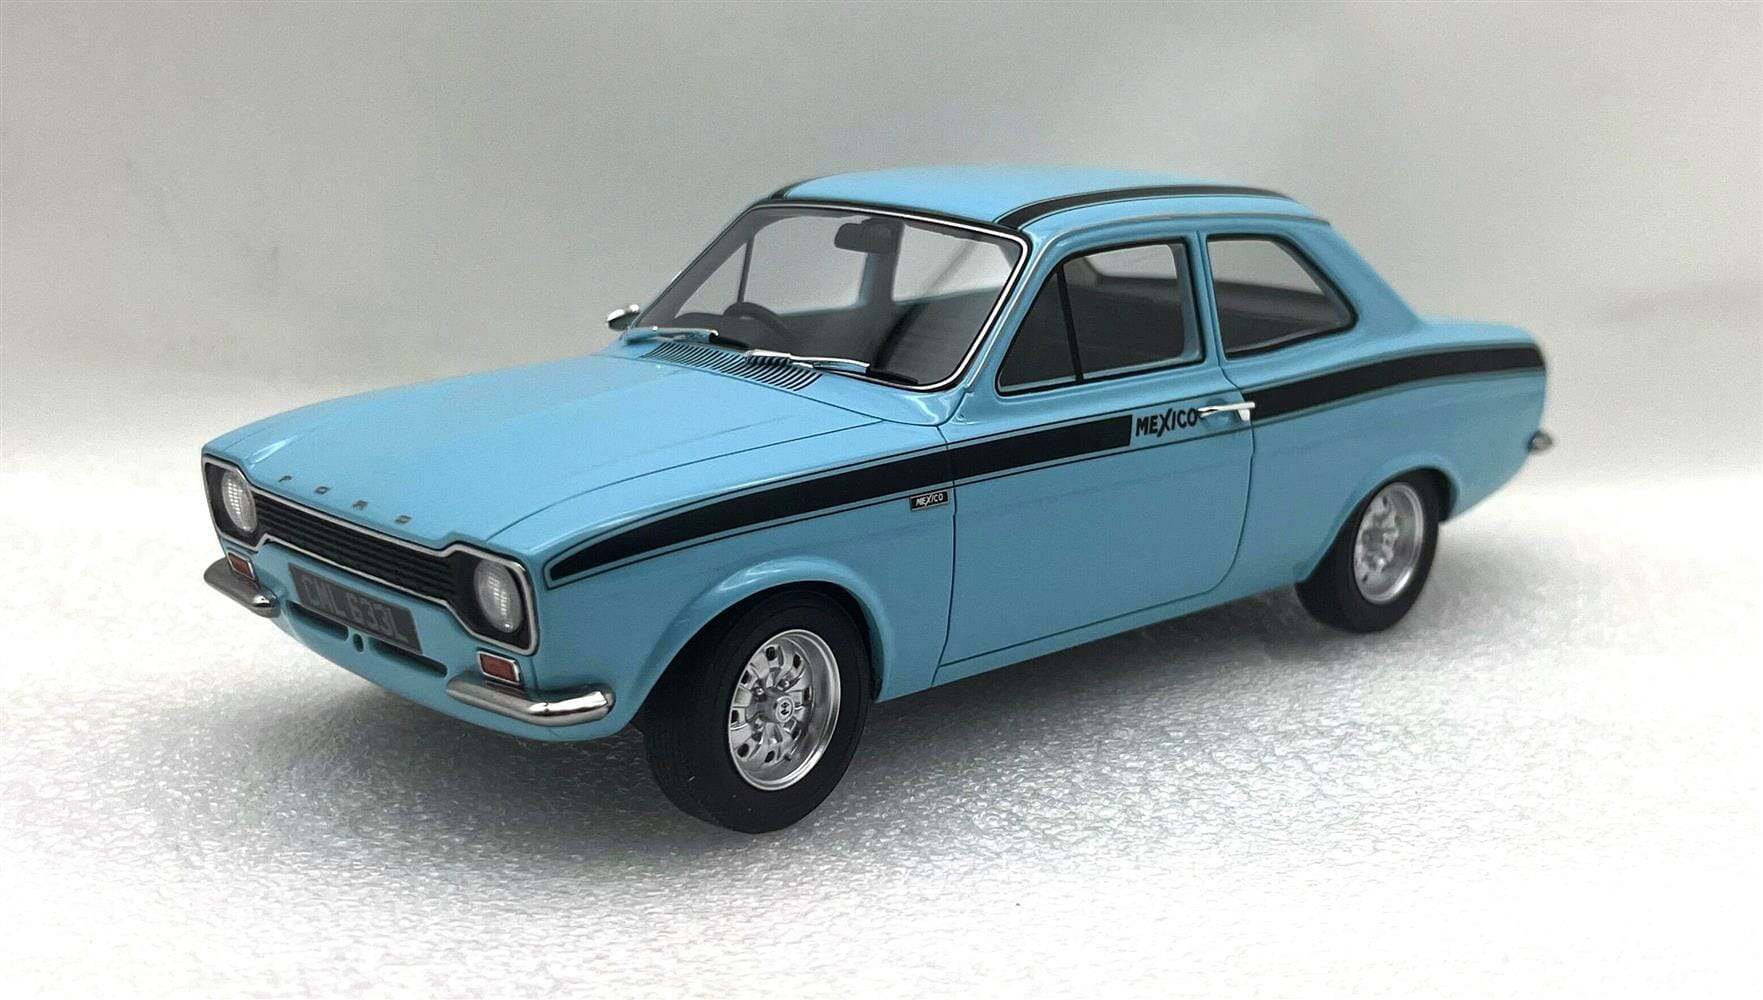 cult scale - 1:18 ford escort mexico blue 1973